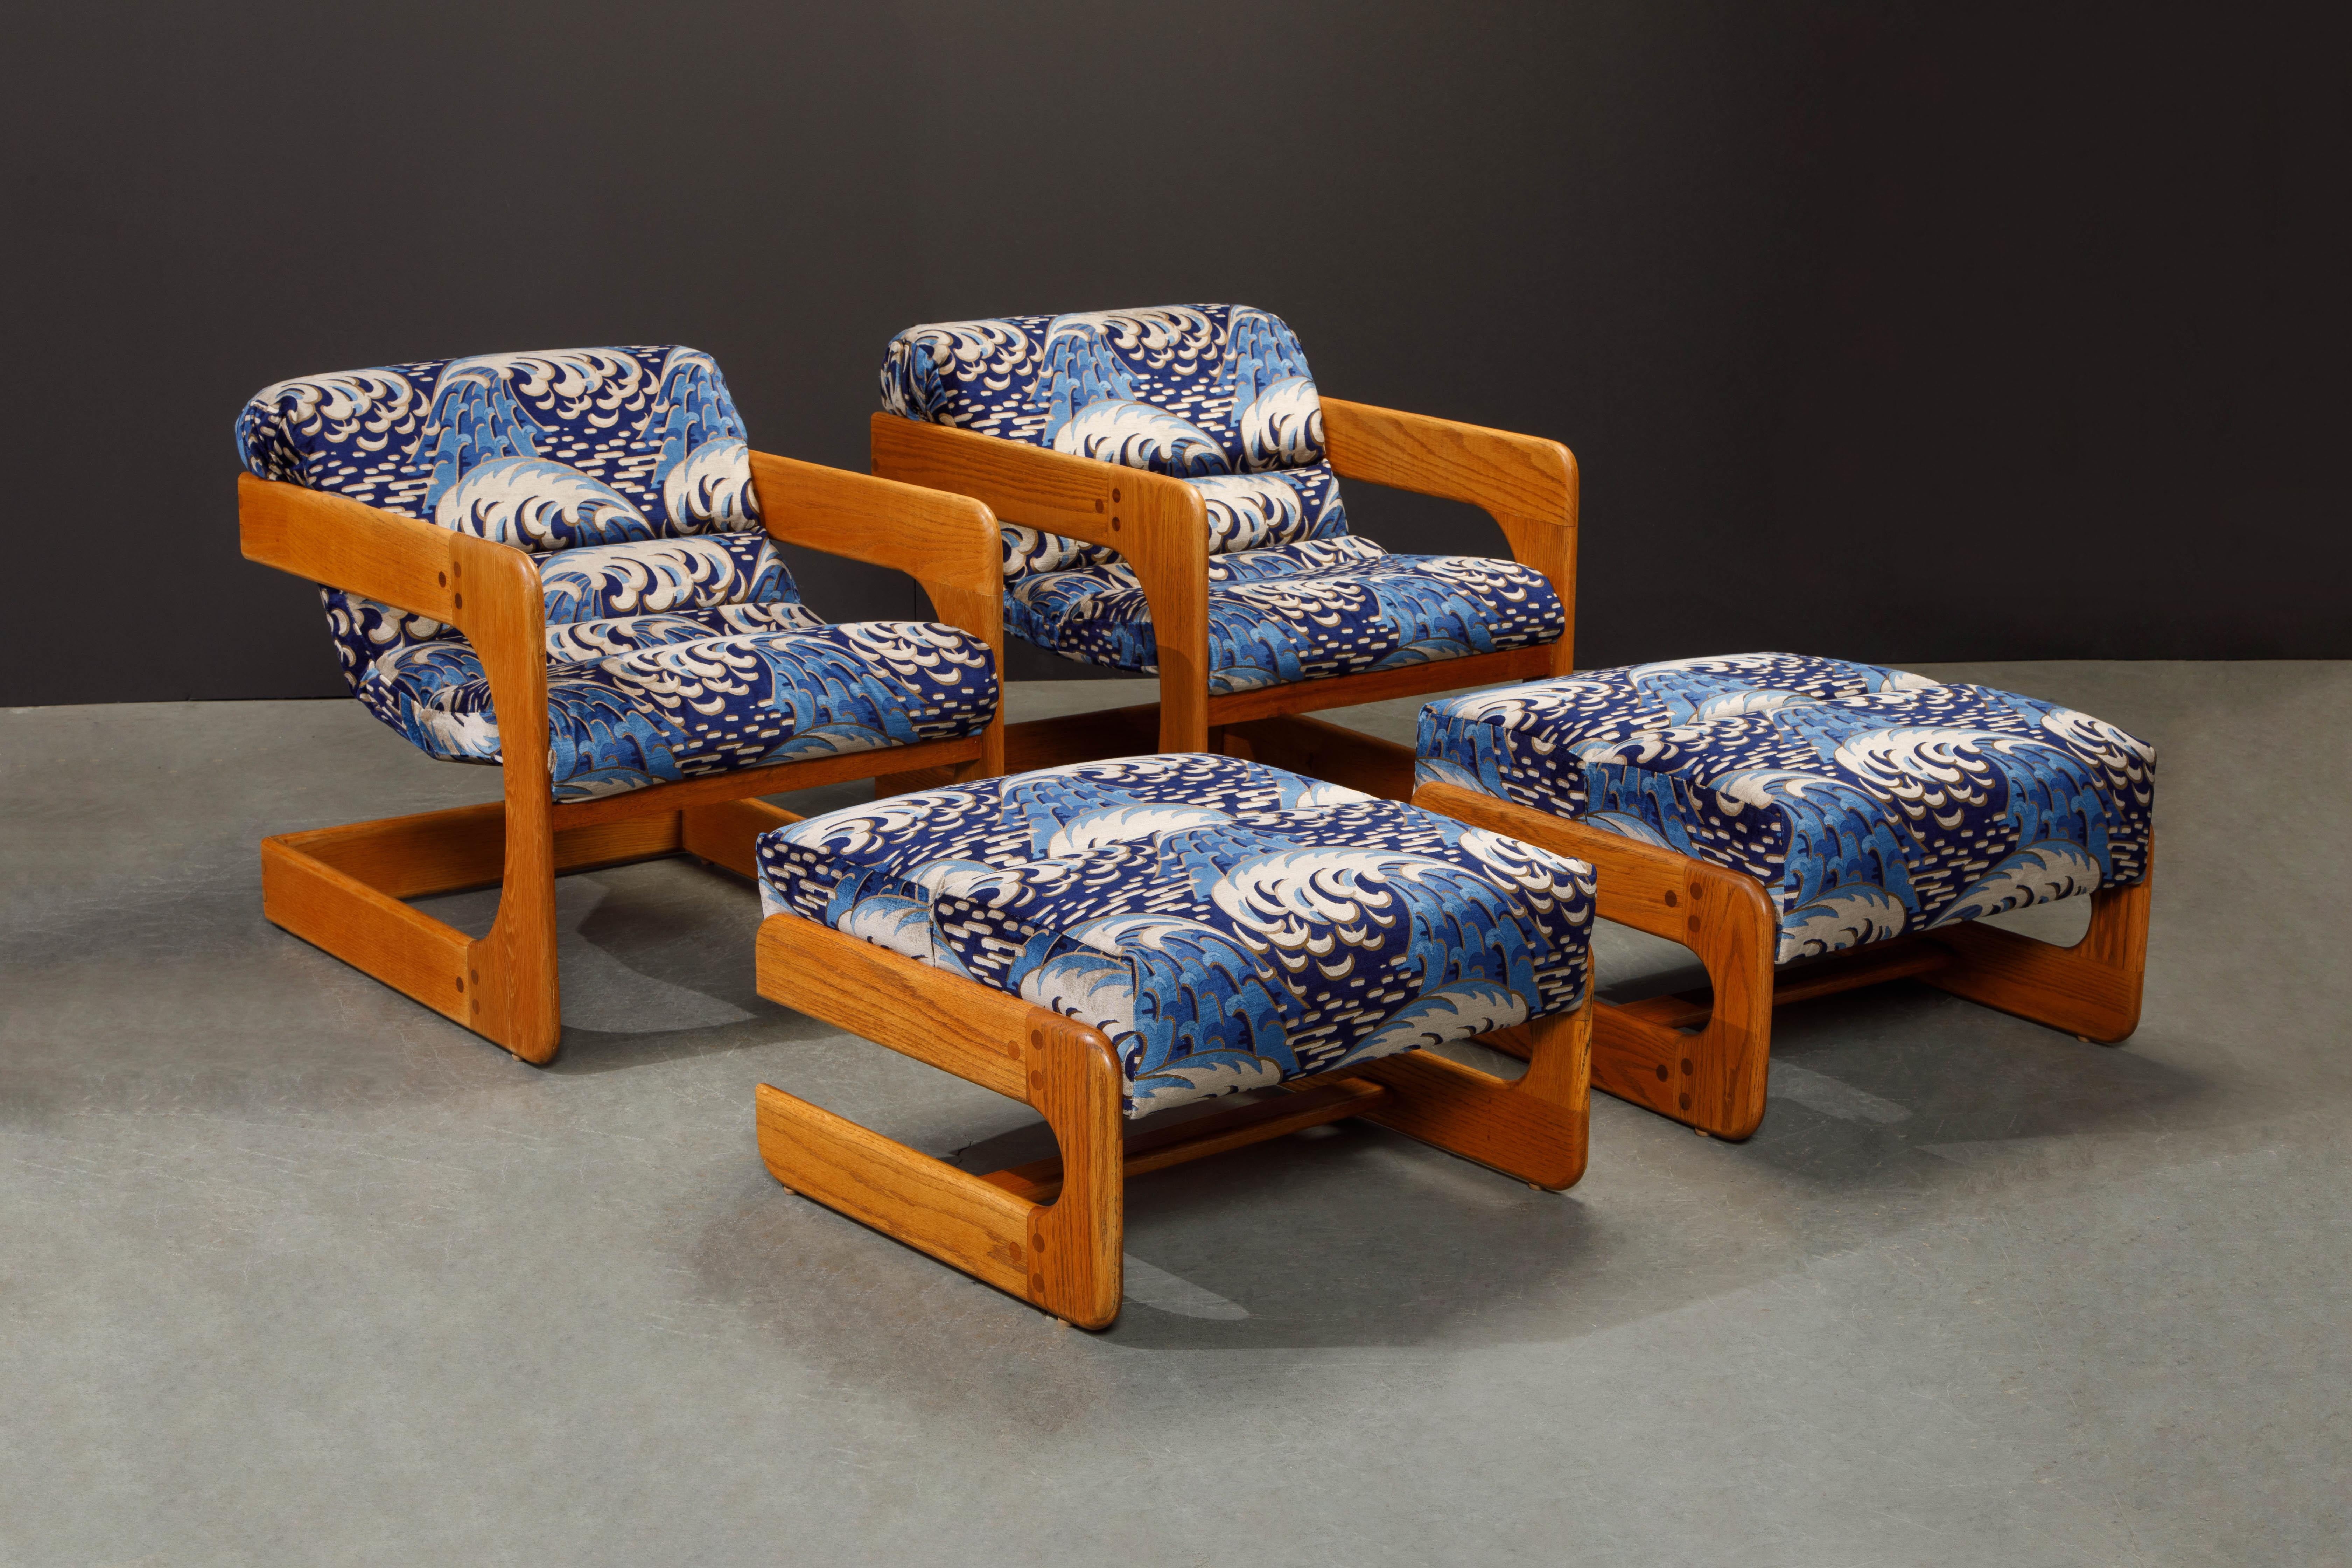 This incredible set of two lounge chairs and two ottomans by Lou Hodges for California Design Group just completed full restoration, beautifully refinished oak frames and newly reupholstered in a Lee Jofa velvet fabric. The set is signed with maker